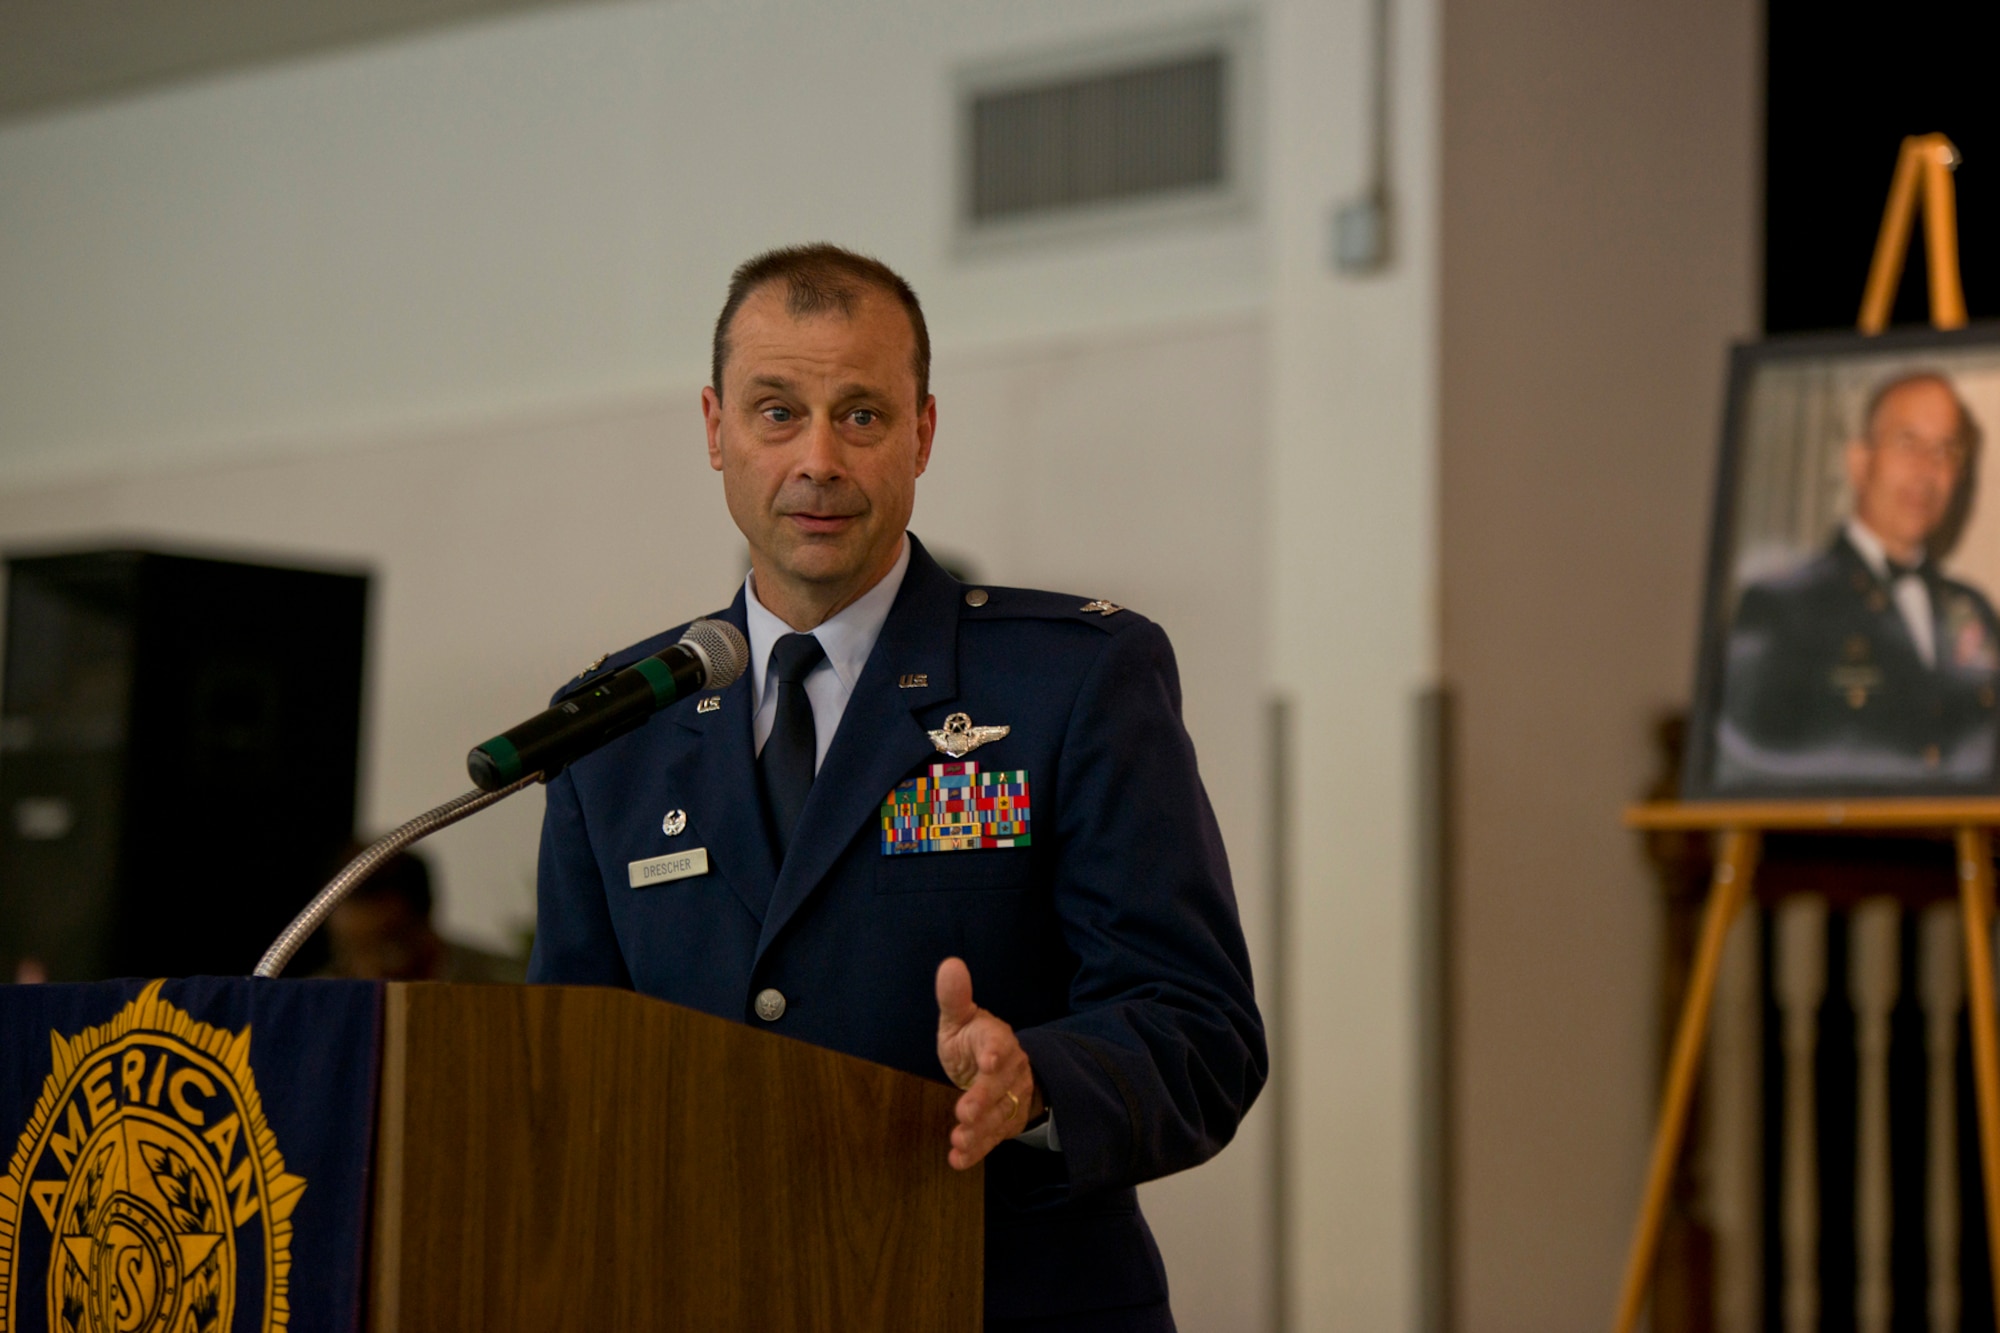 U.S. Air Force Reserve Col. Craig Drescher, commander, 913th Airlift Group, shares a wartime experience with the audience at the 11th Annual Tribute to Fallen Heroes Ceremony in Sherwood, Ark., Apr. 9, 2016. Drescher was a guest speaker at the annual event, which honors the memory of all Arkansans whom made the ultimate sacrifice as a result of the war against terrorism. (U.S. Air Force photo by Master Sgt. Jeff Walston/released) 